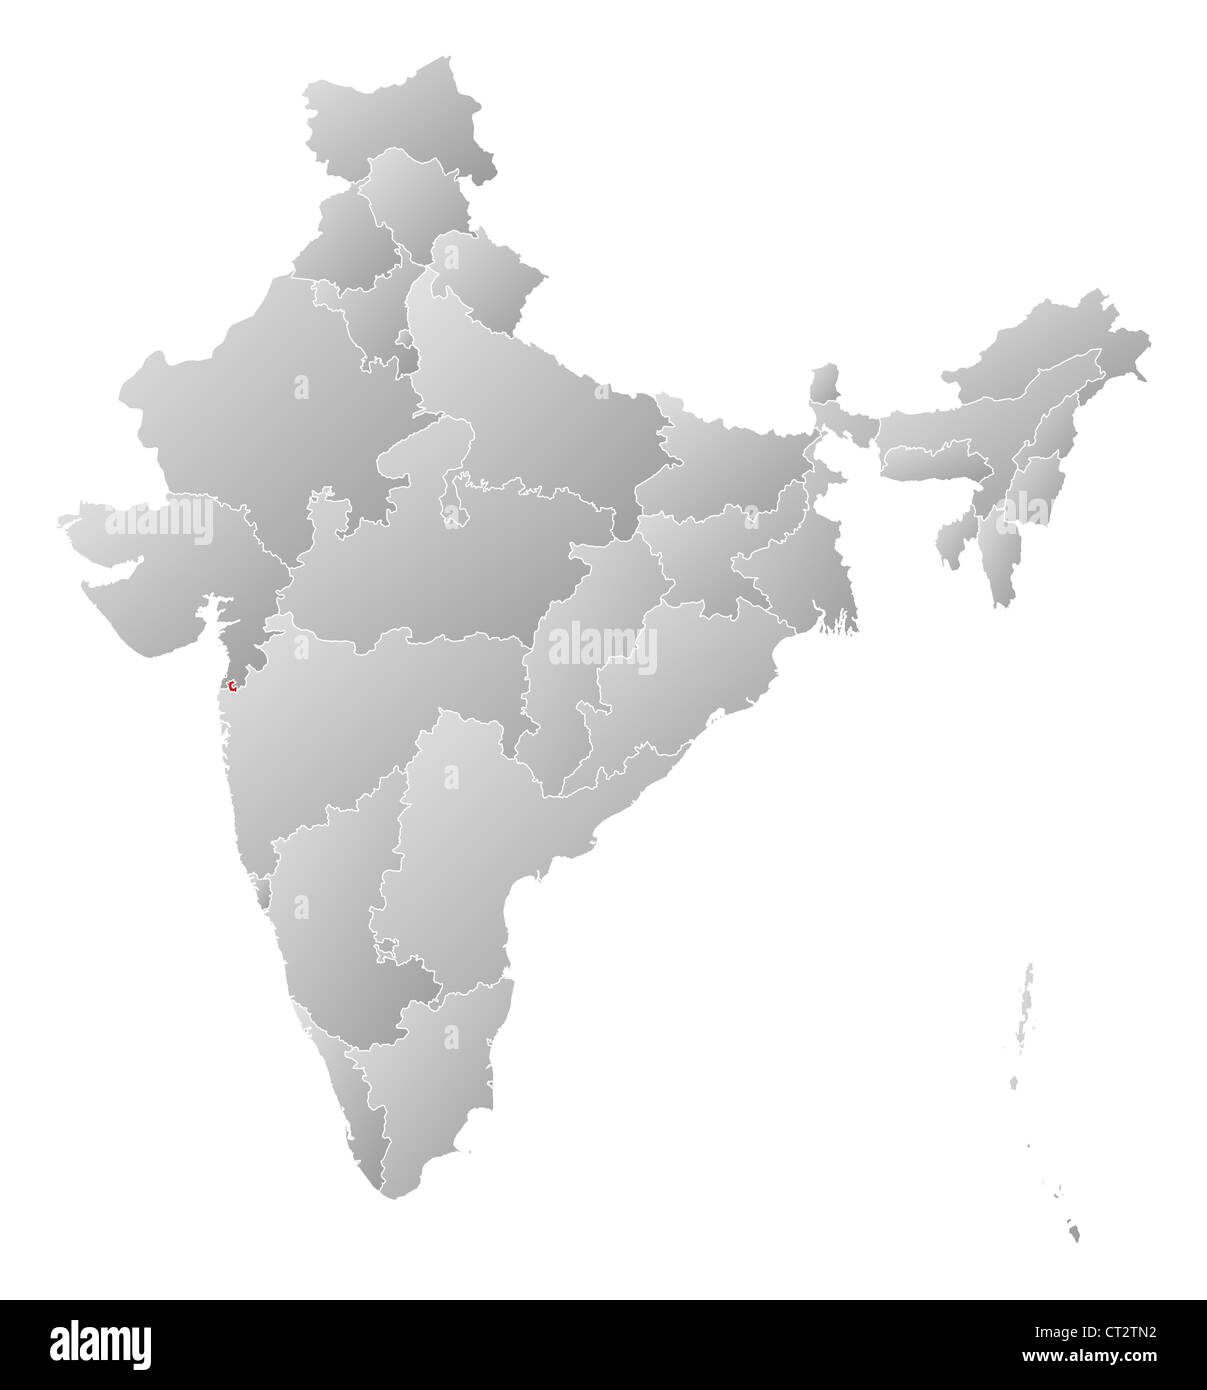 Political map of India with the several states where Dadra and Nagar Haveli is highlighted. Stock Photo